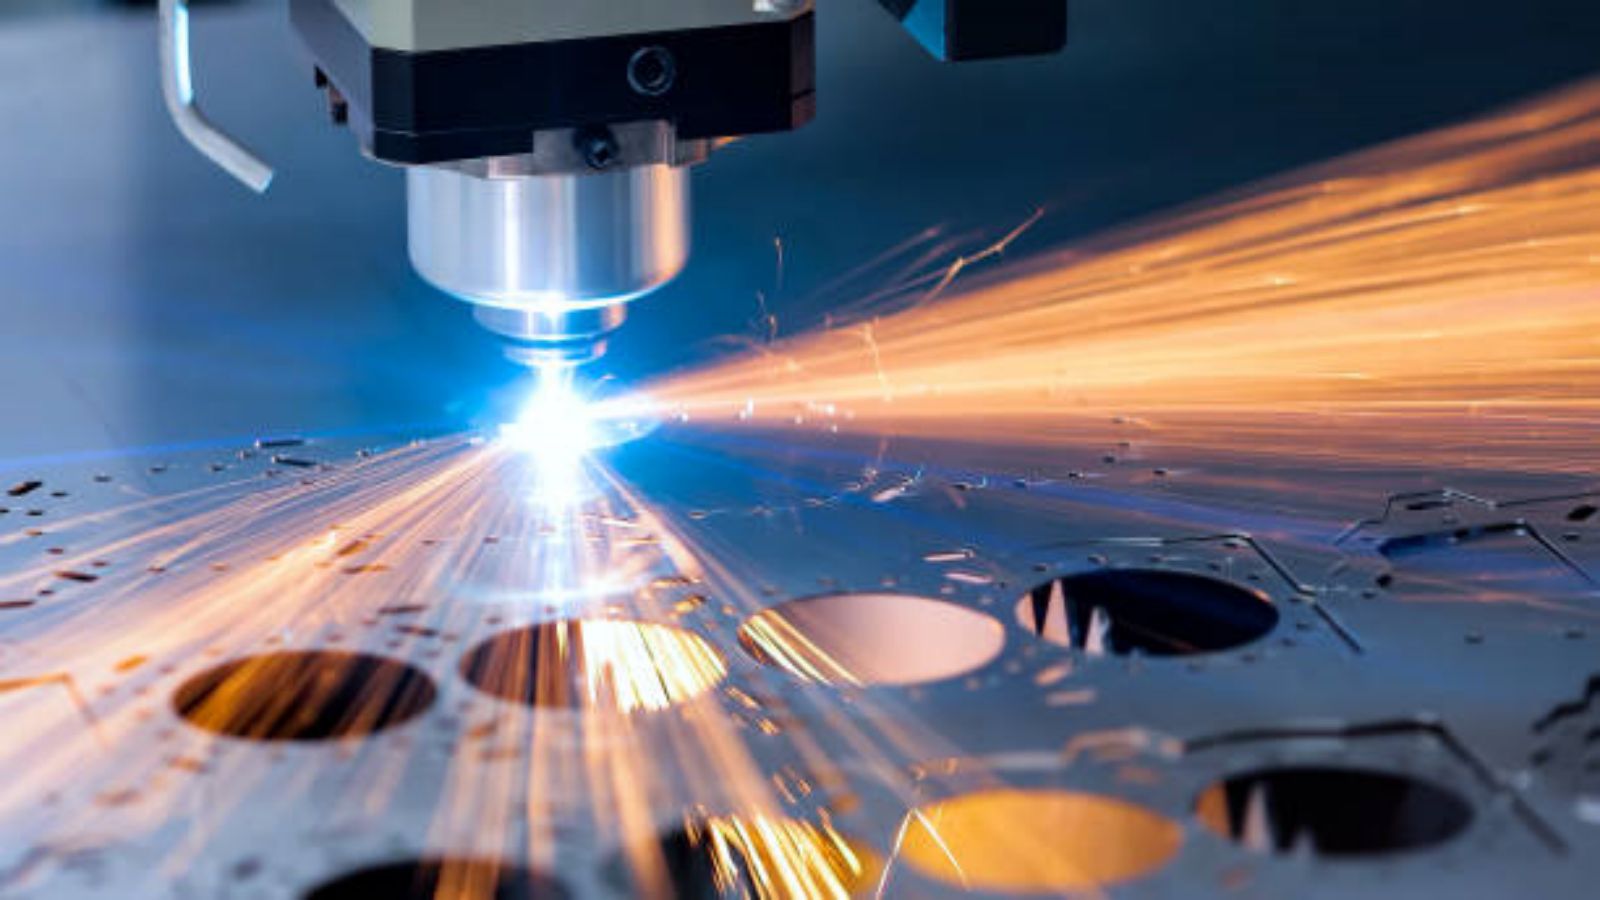 CNC Machine Operator Jobs Near Me - Everything You Need to Know